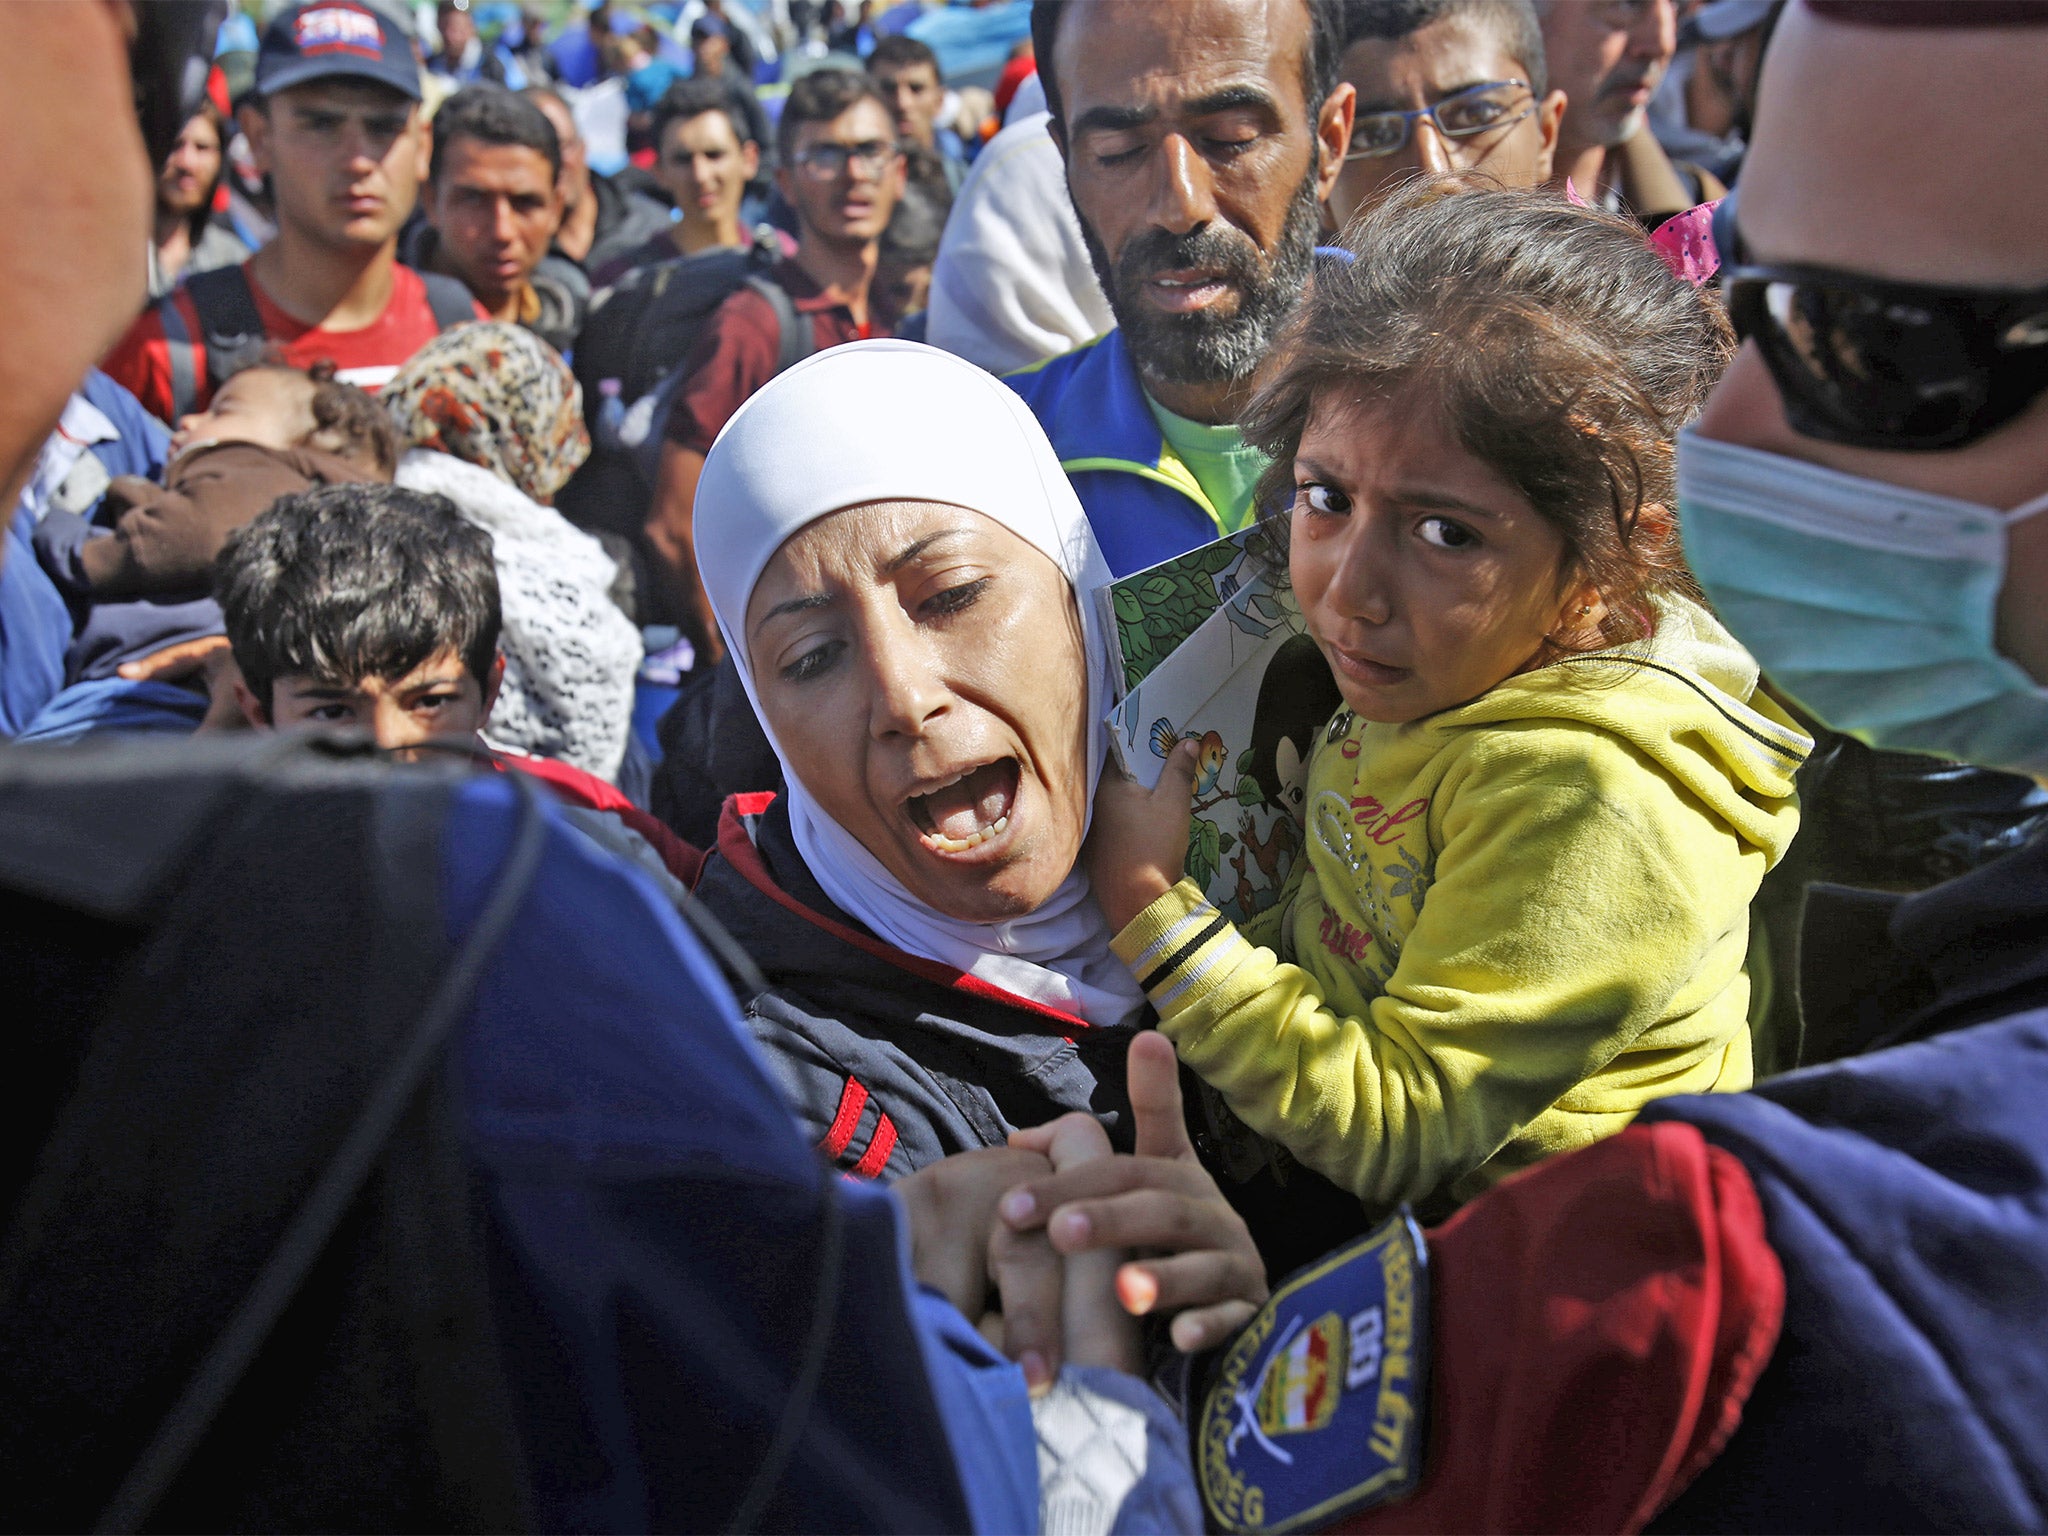 A migrant woman holds a child as she tries to talk to Hungarian police officers in Roszke